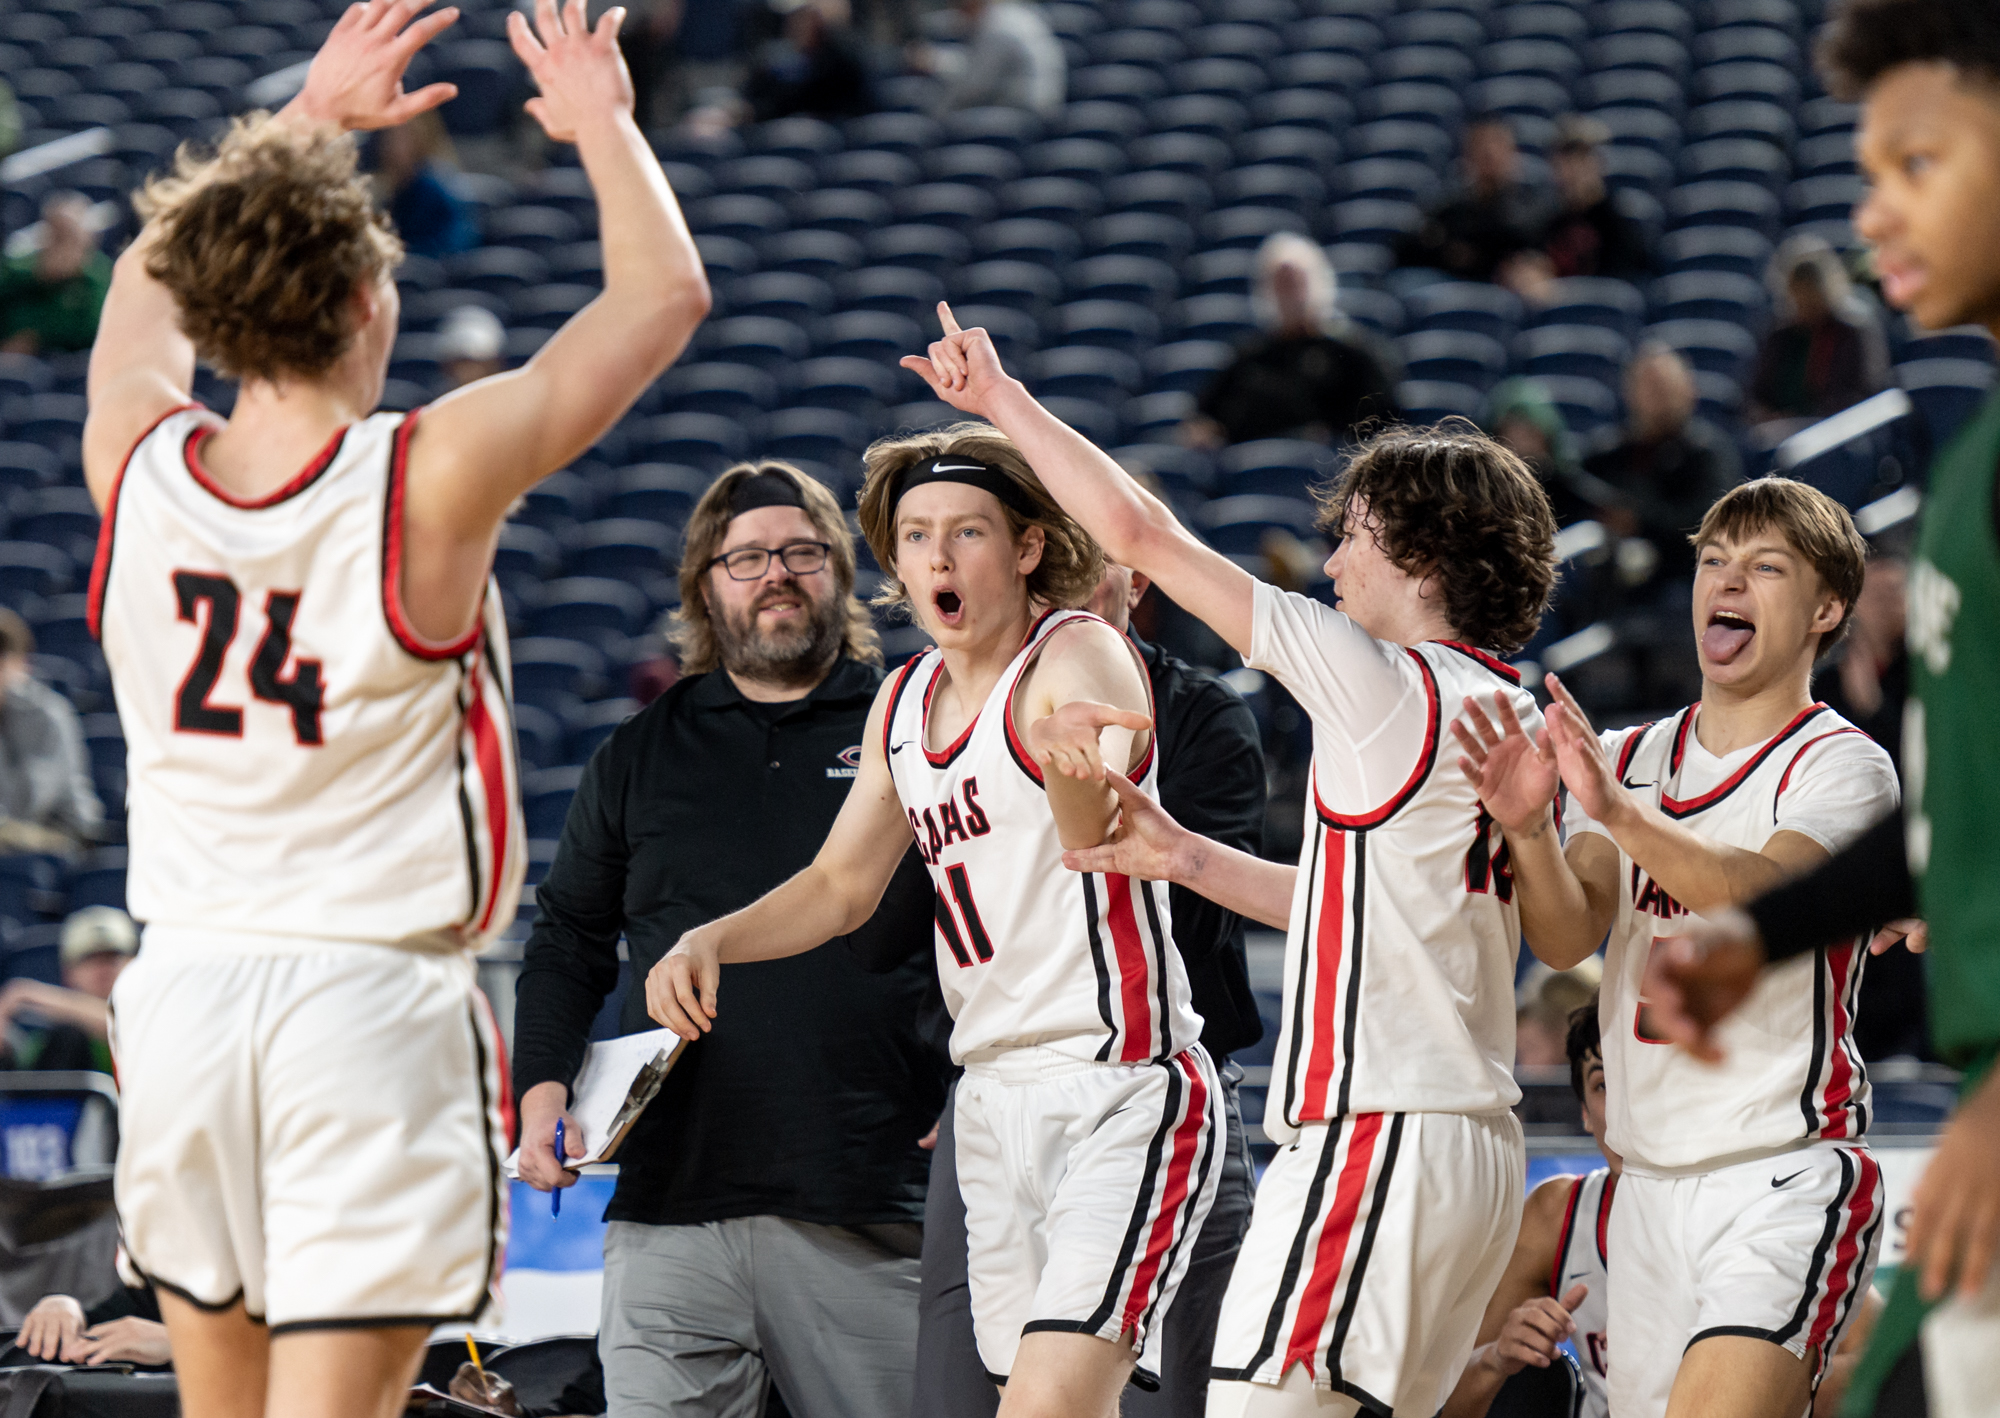 Camas senior guard Matthew Chilian leads the bench celebration during a Class 4A State boys basketball game on Friday, March 3, 2023, at the Tacoma Dome.